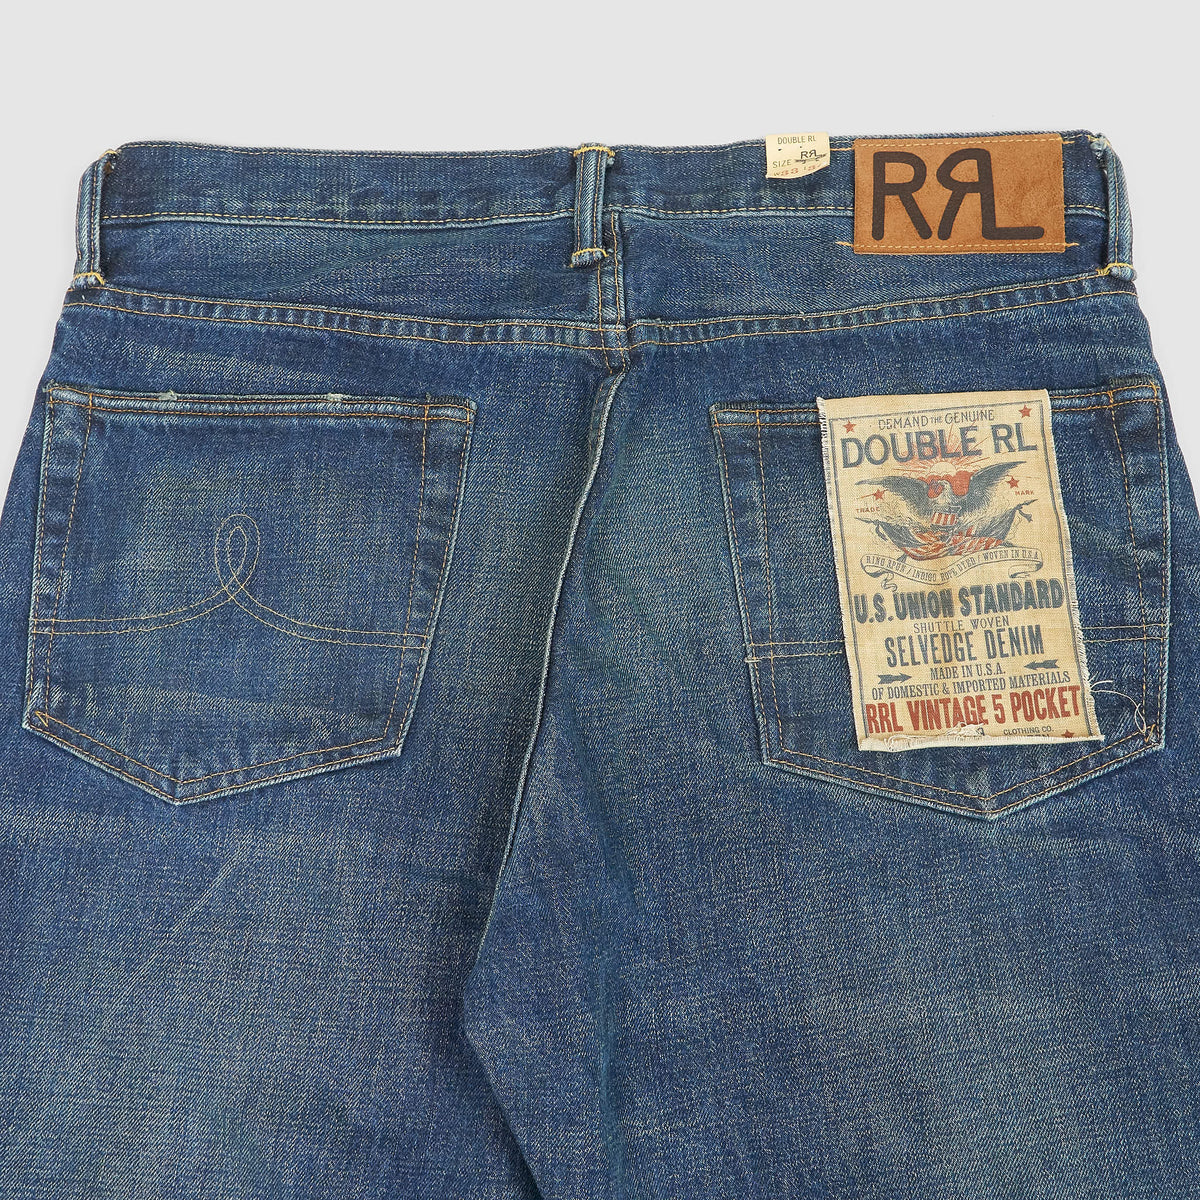 Double RL Straight Leg Selvage Jeans - DeeCee style